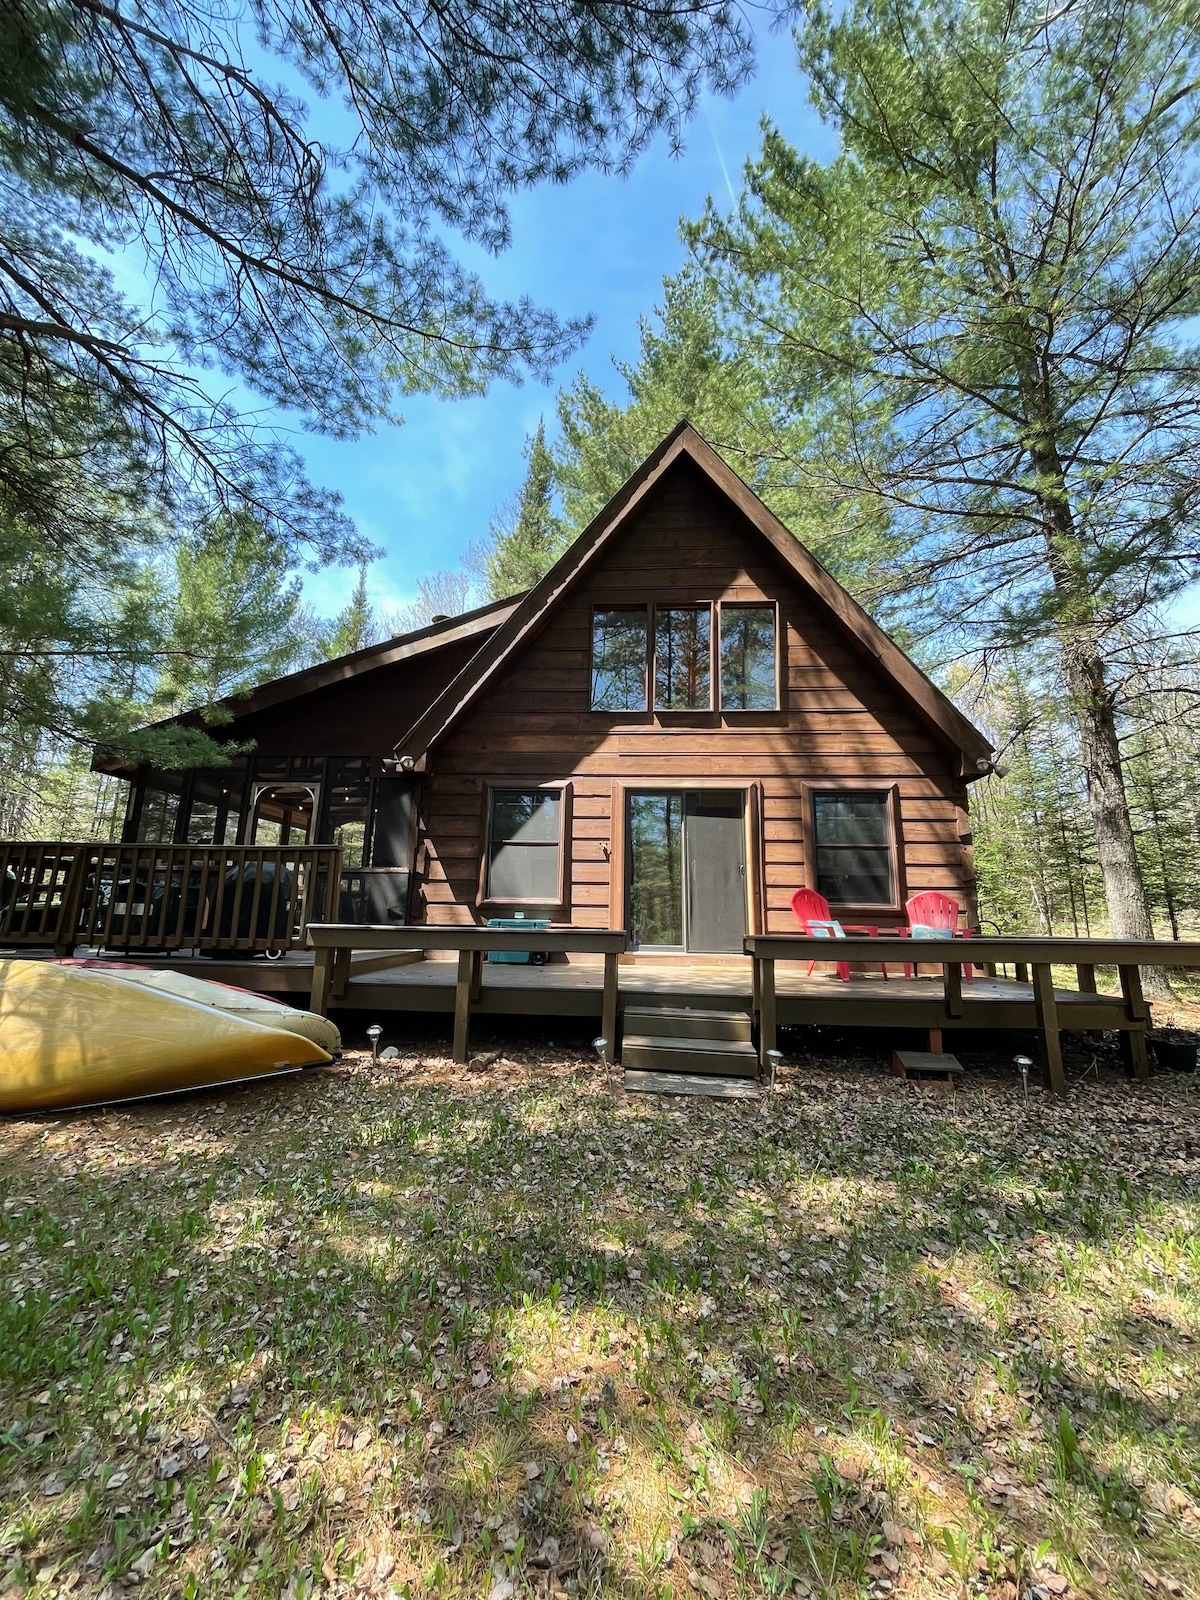 S'more Fun” Cozy cabin in the woods on the river - Cabins for Rent in  Grayling, Michigan, United States - Airbnb